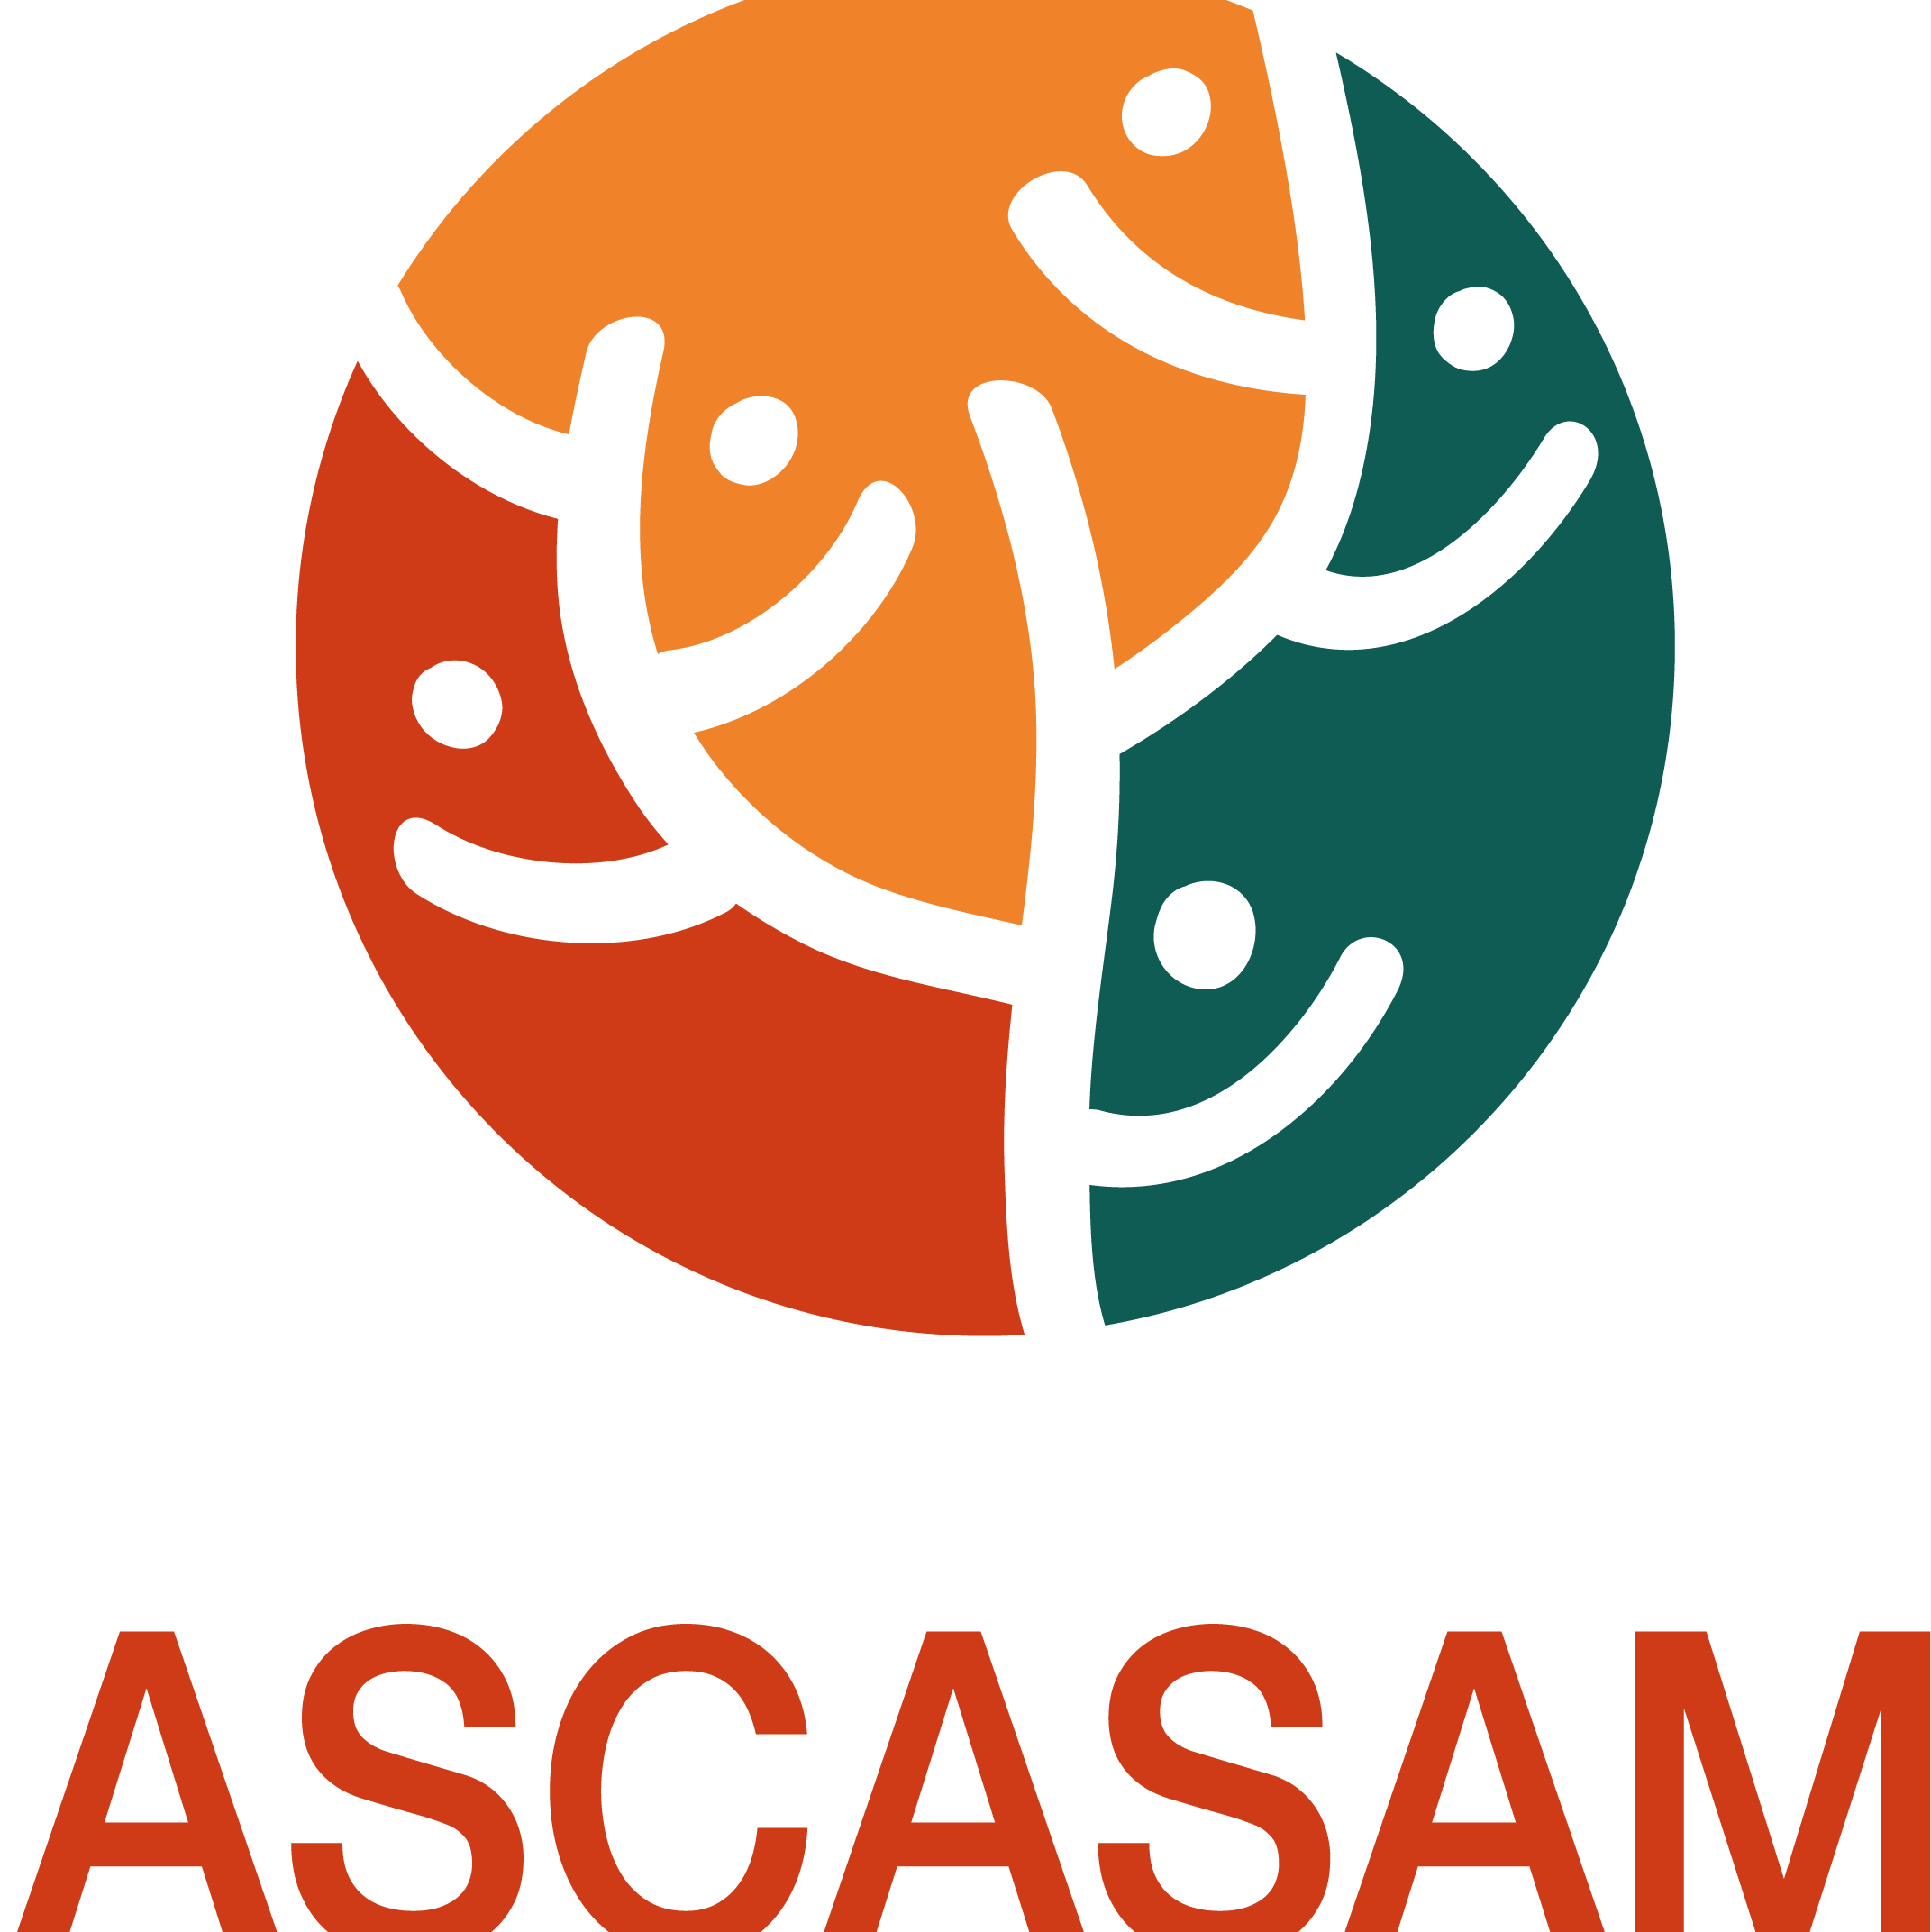 ASCASAM - Salud Mental Cantabria Profile, news, ratings and communication